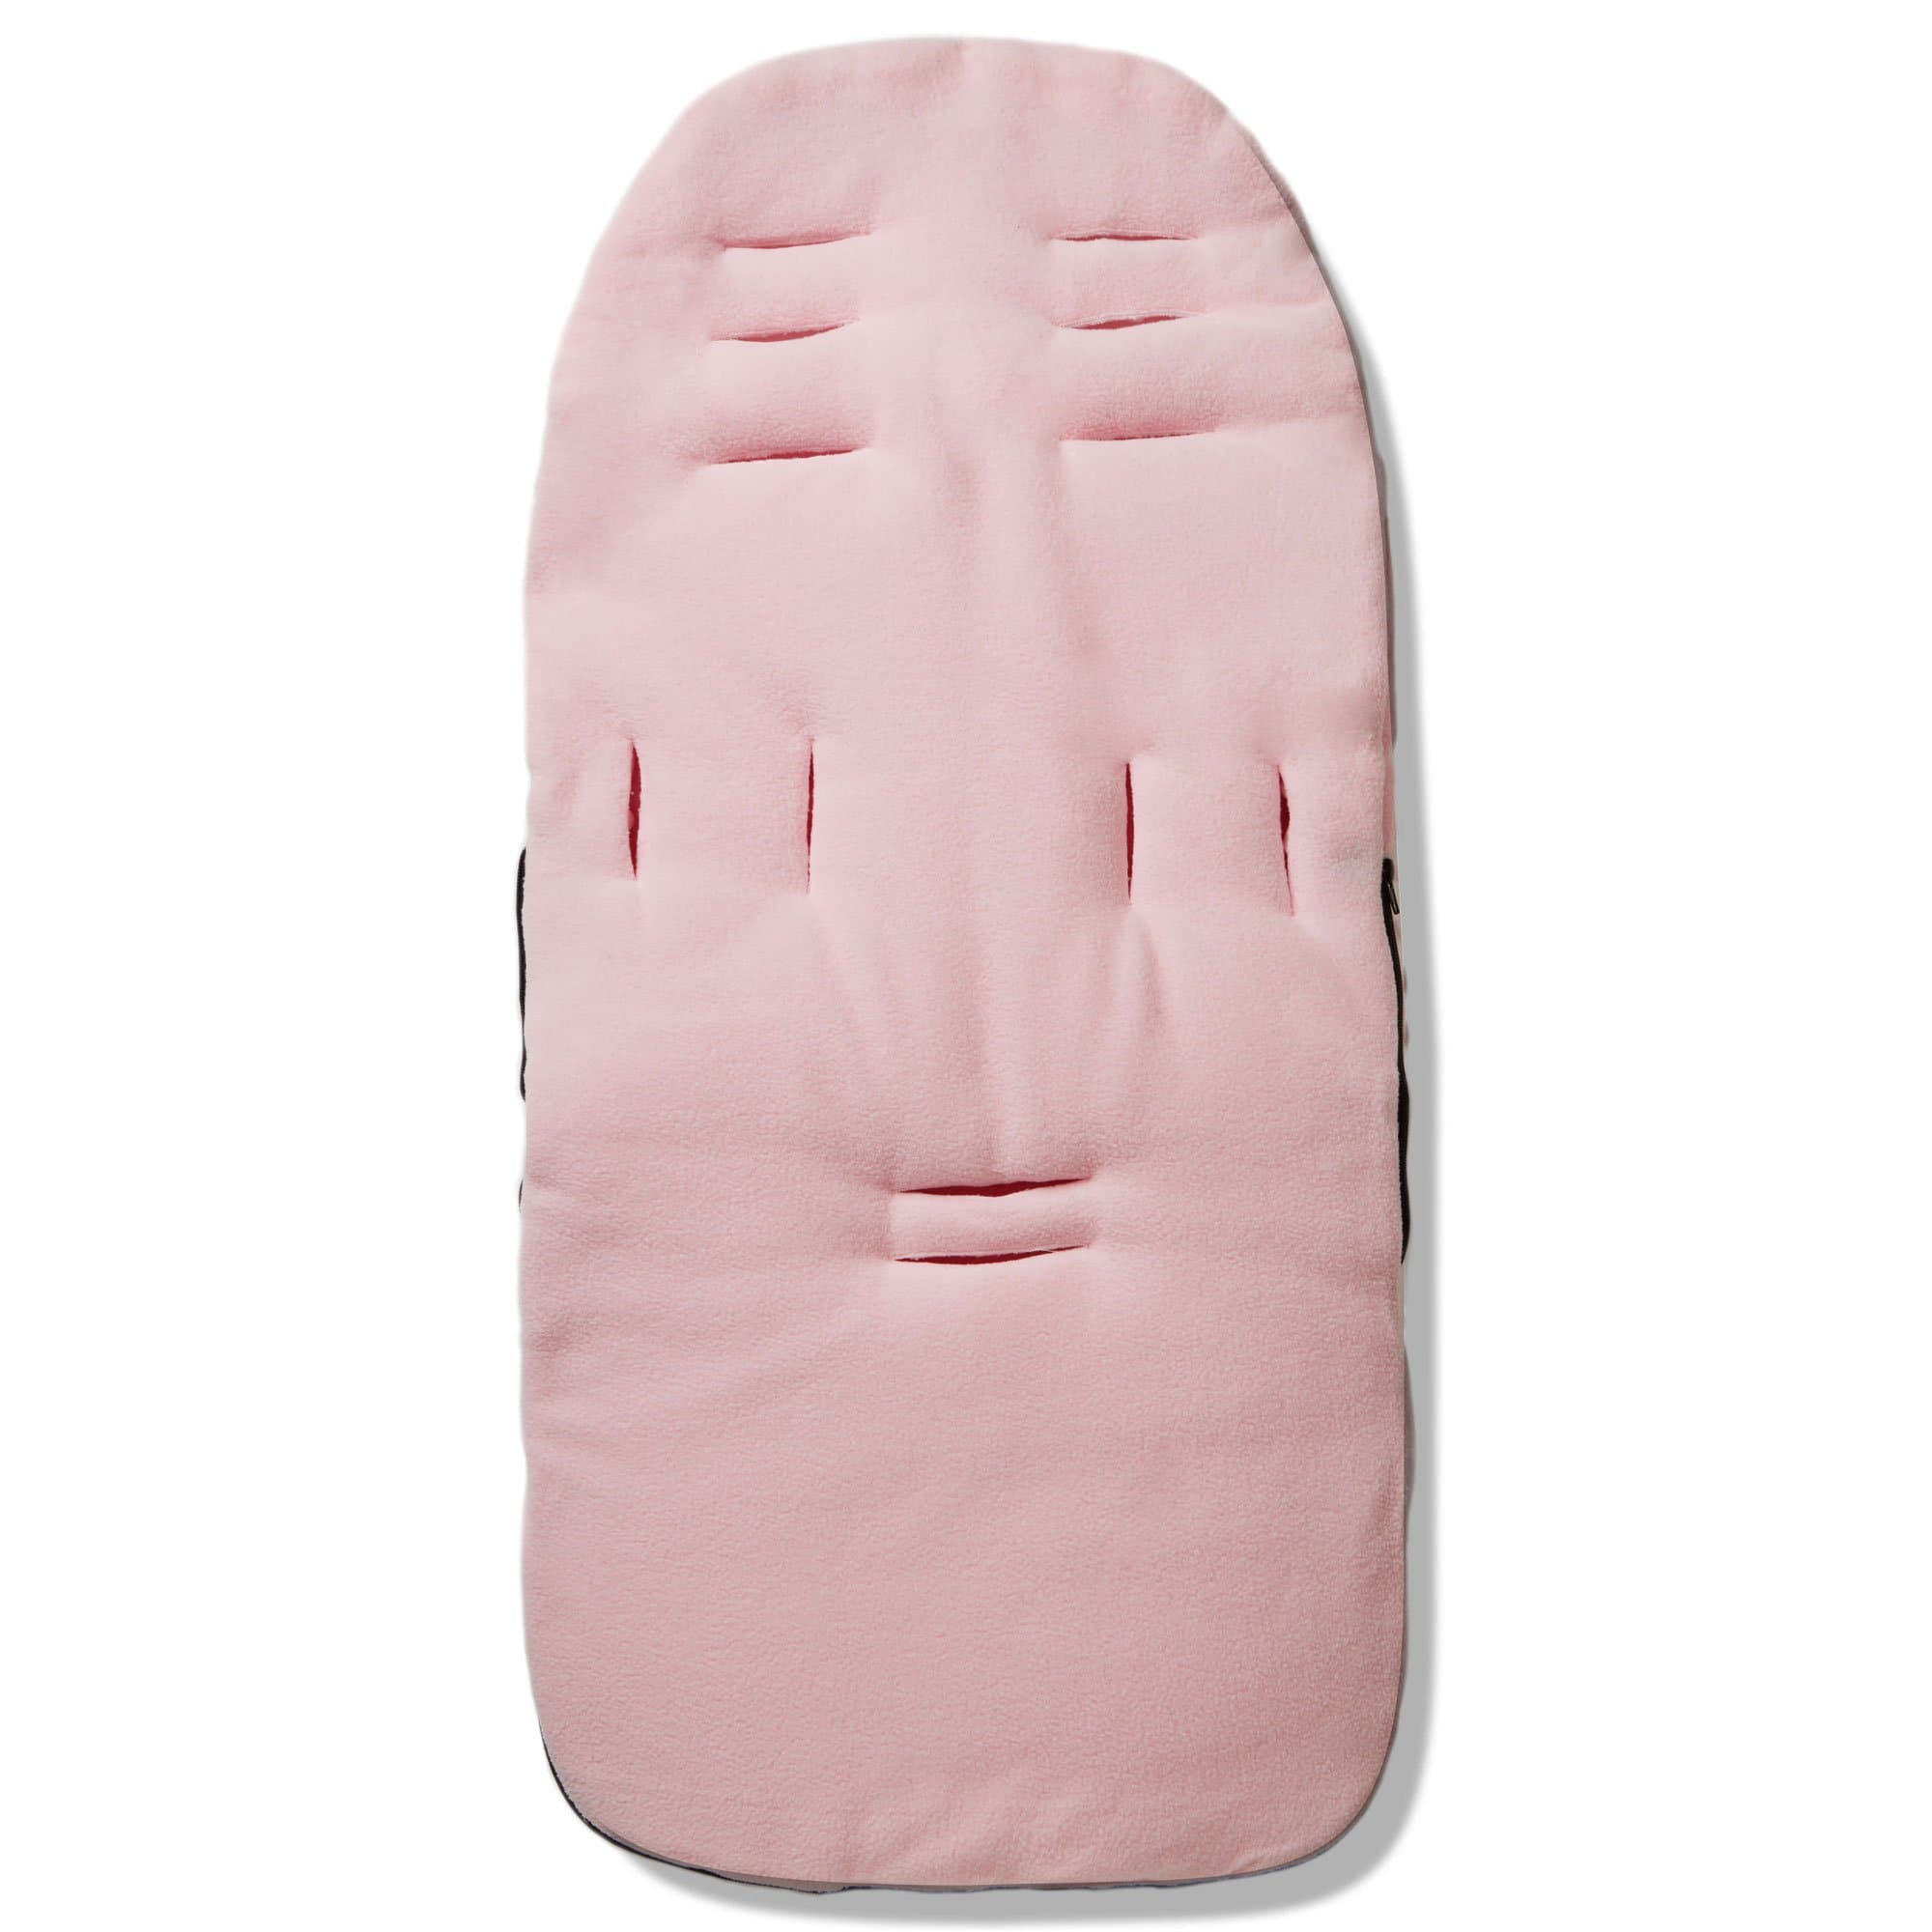 Dimple Footmuff / Cosy Toes Compatible with Bebecar - For Your Little One